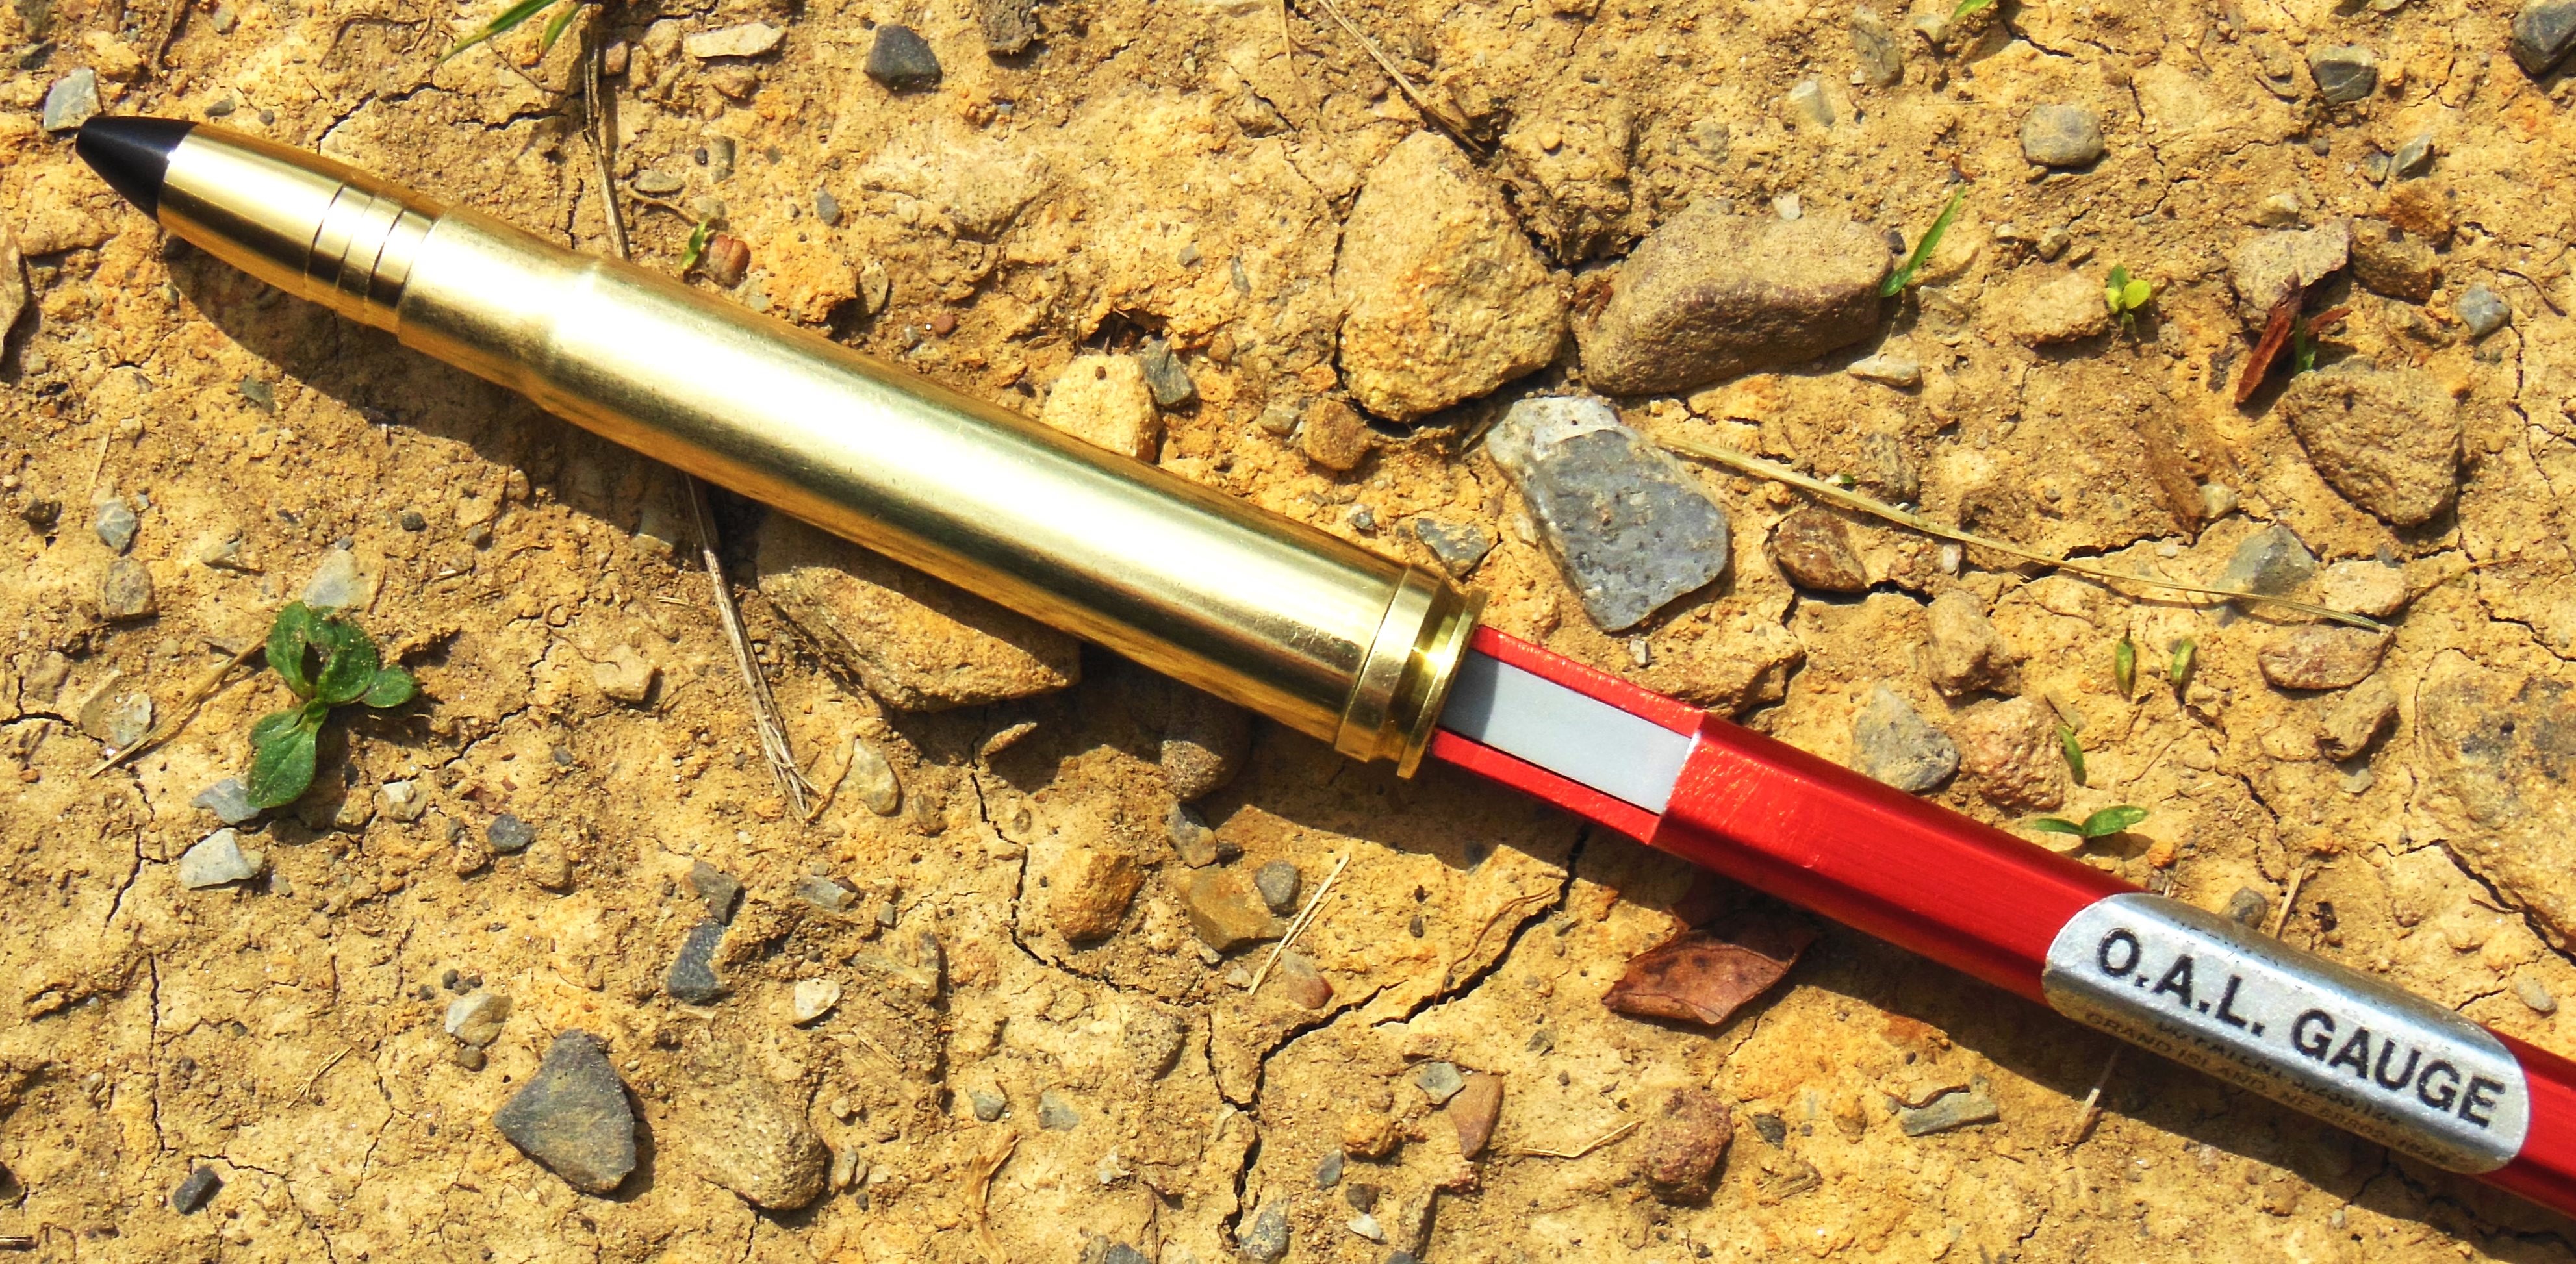 Hornady's L-N-L  O.A.L. Gauge helps to determine length to touch rifling with a given bullet